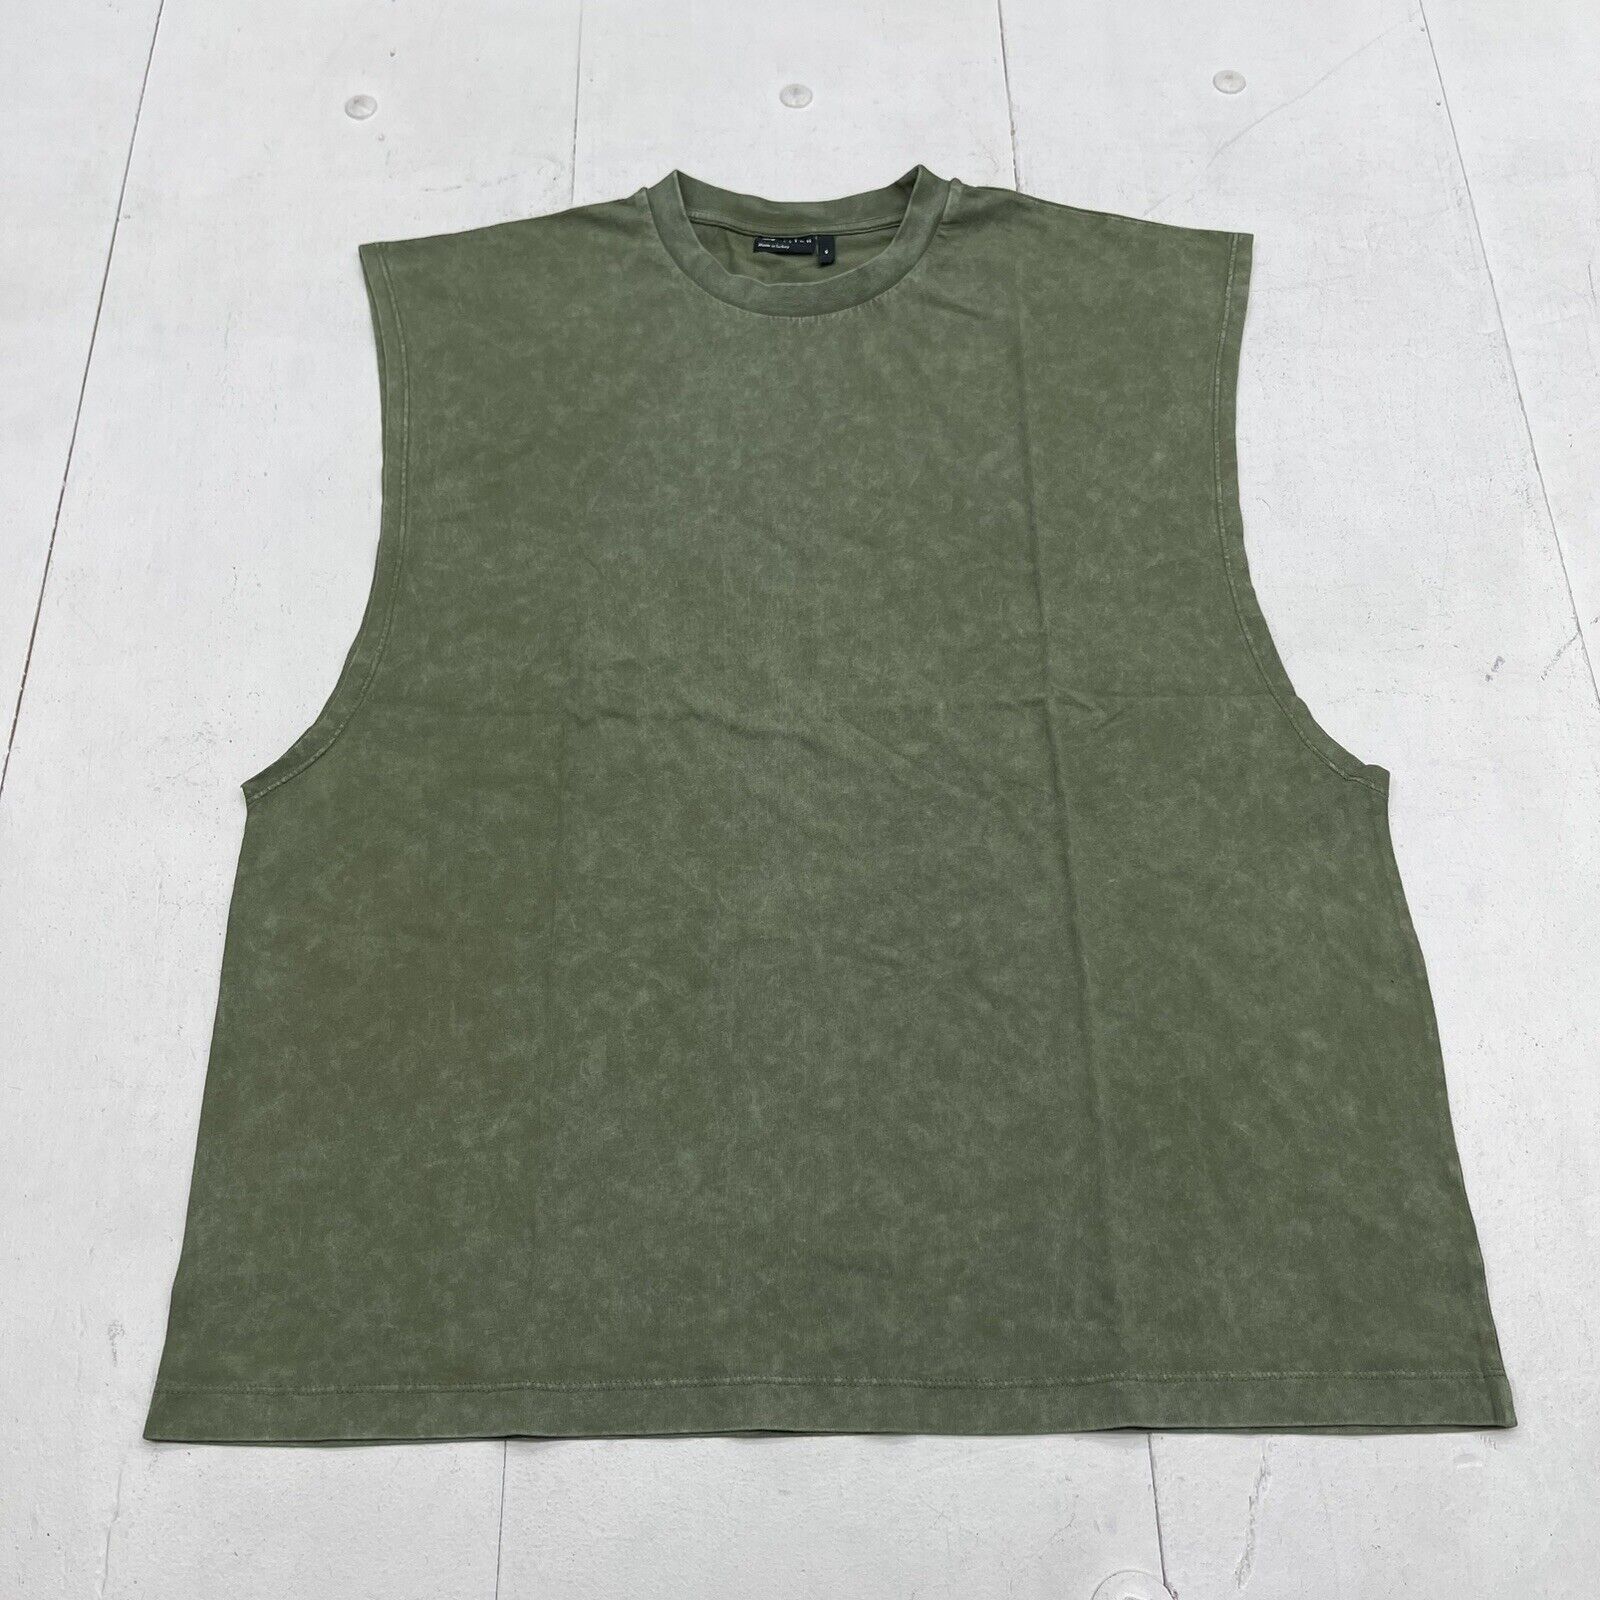 ASOS Green Oversized Tank With Spine Print Mens Size Medium New